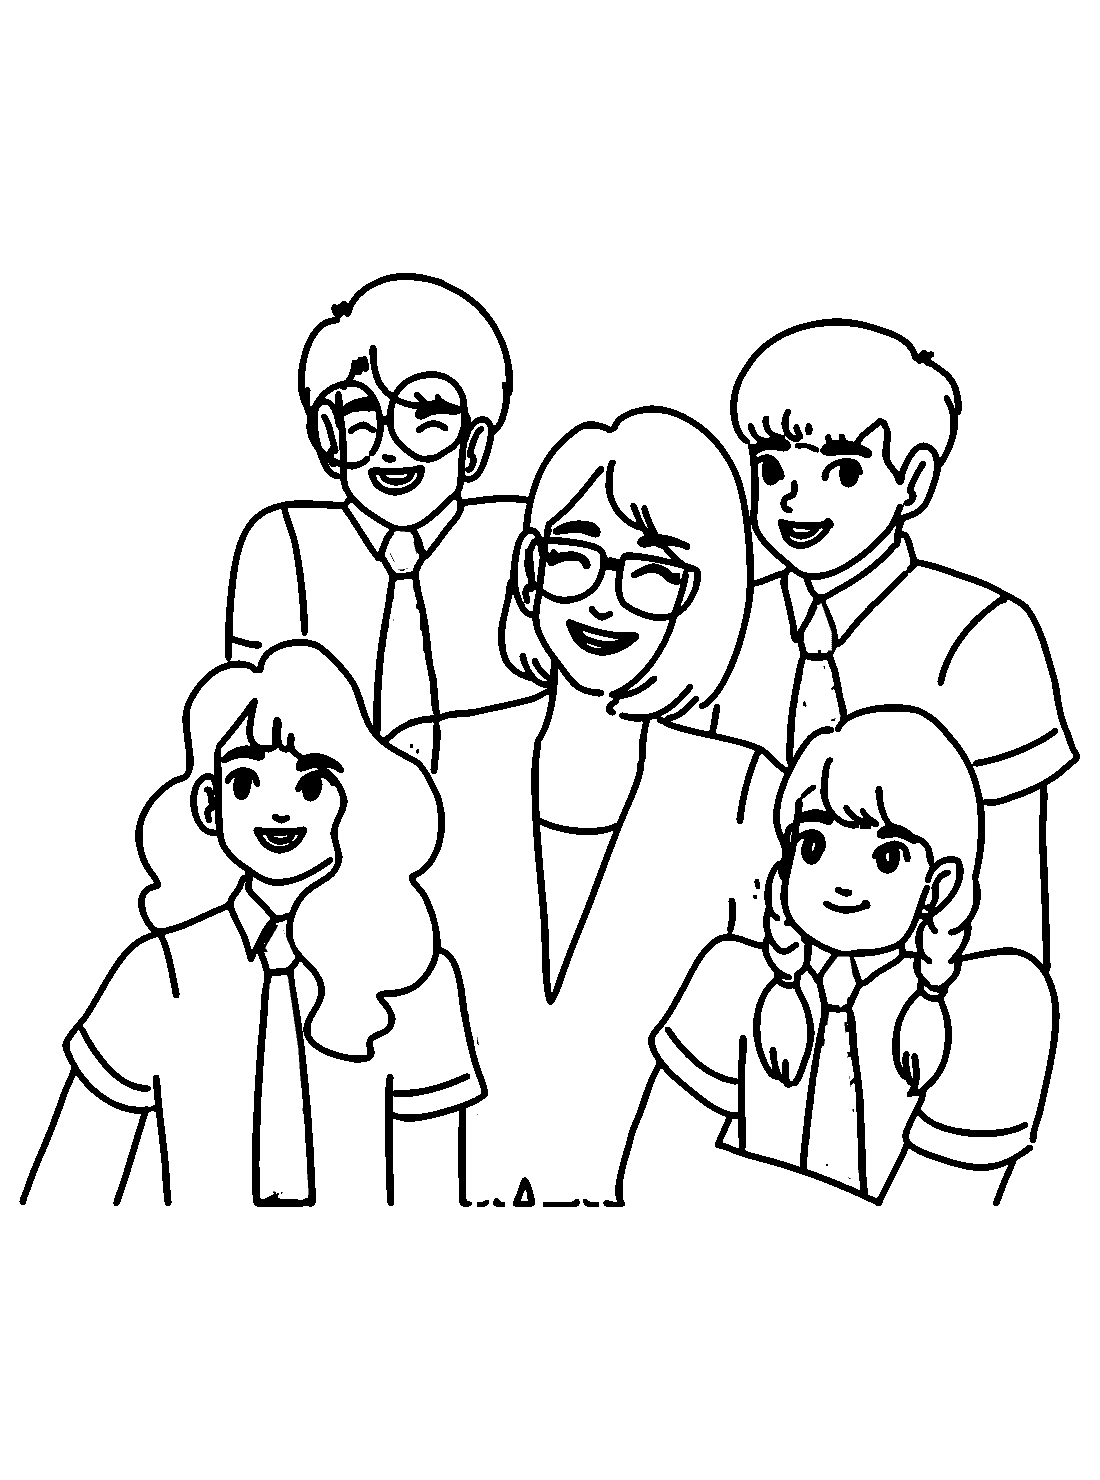 Teacher and students